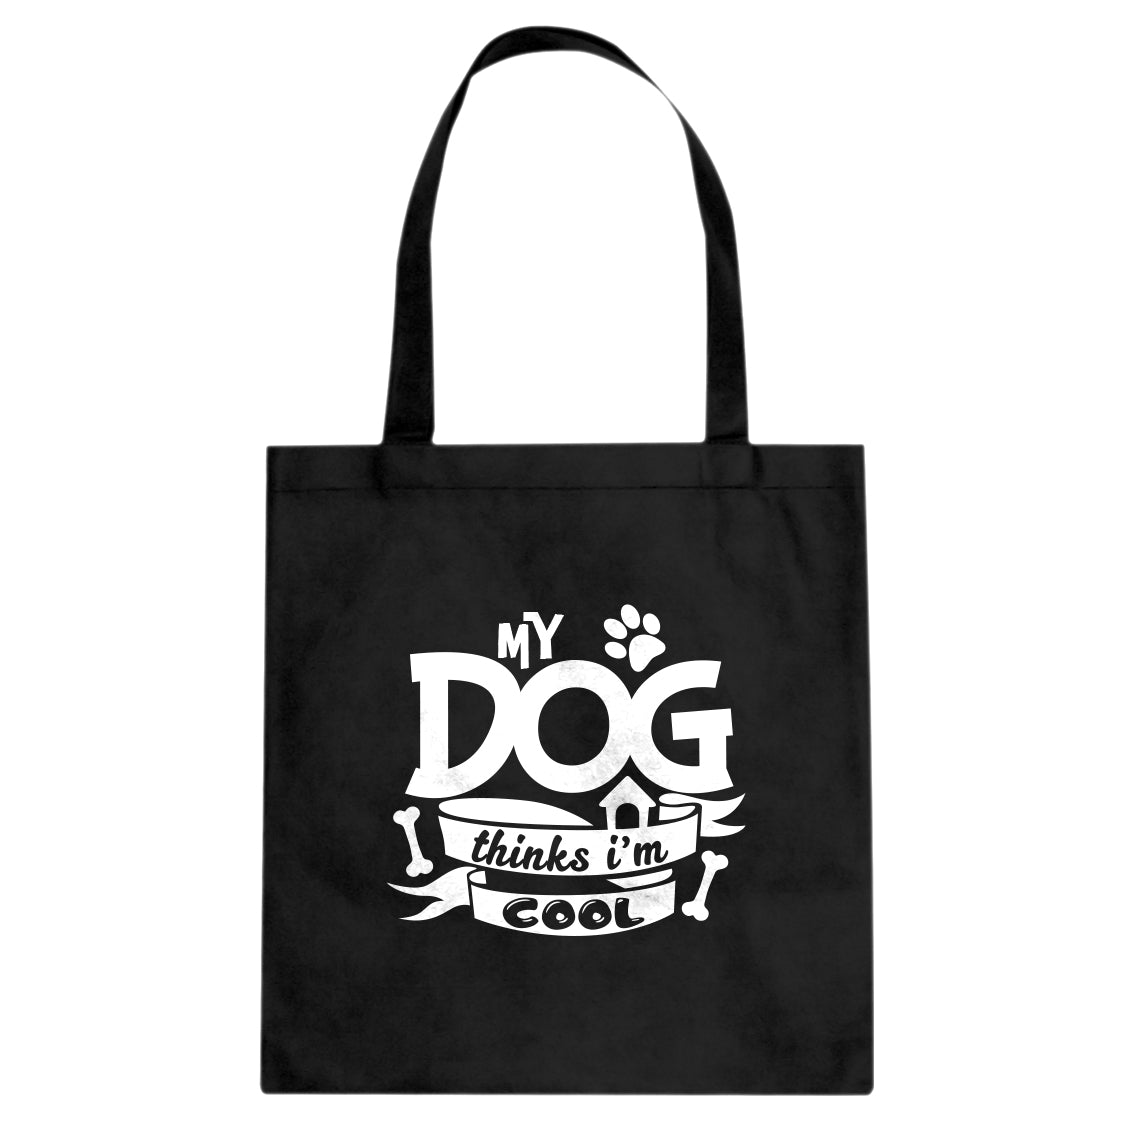 My Dog Thinks I'm Cool Cotton Canvas Tote Bag